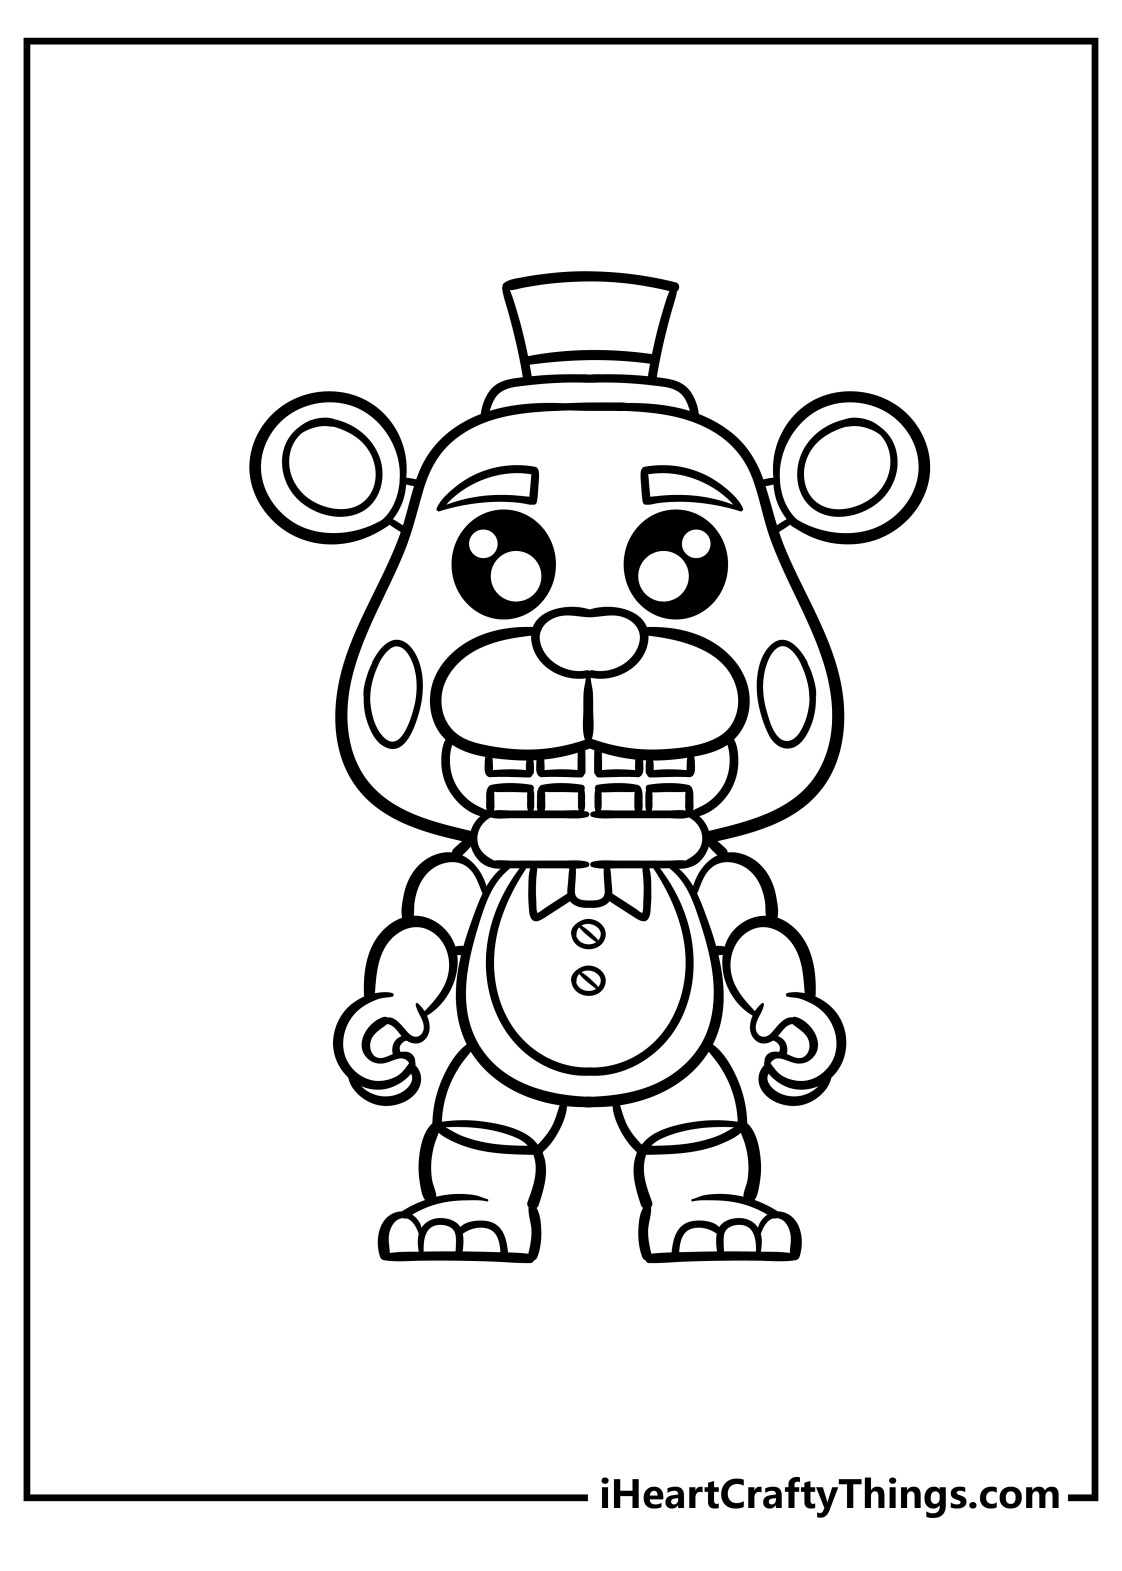 Five Nights At Freddy s Coloring Pages (Free Printables)